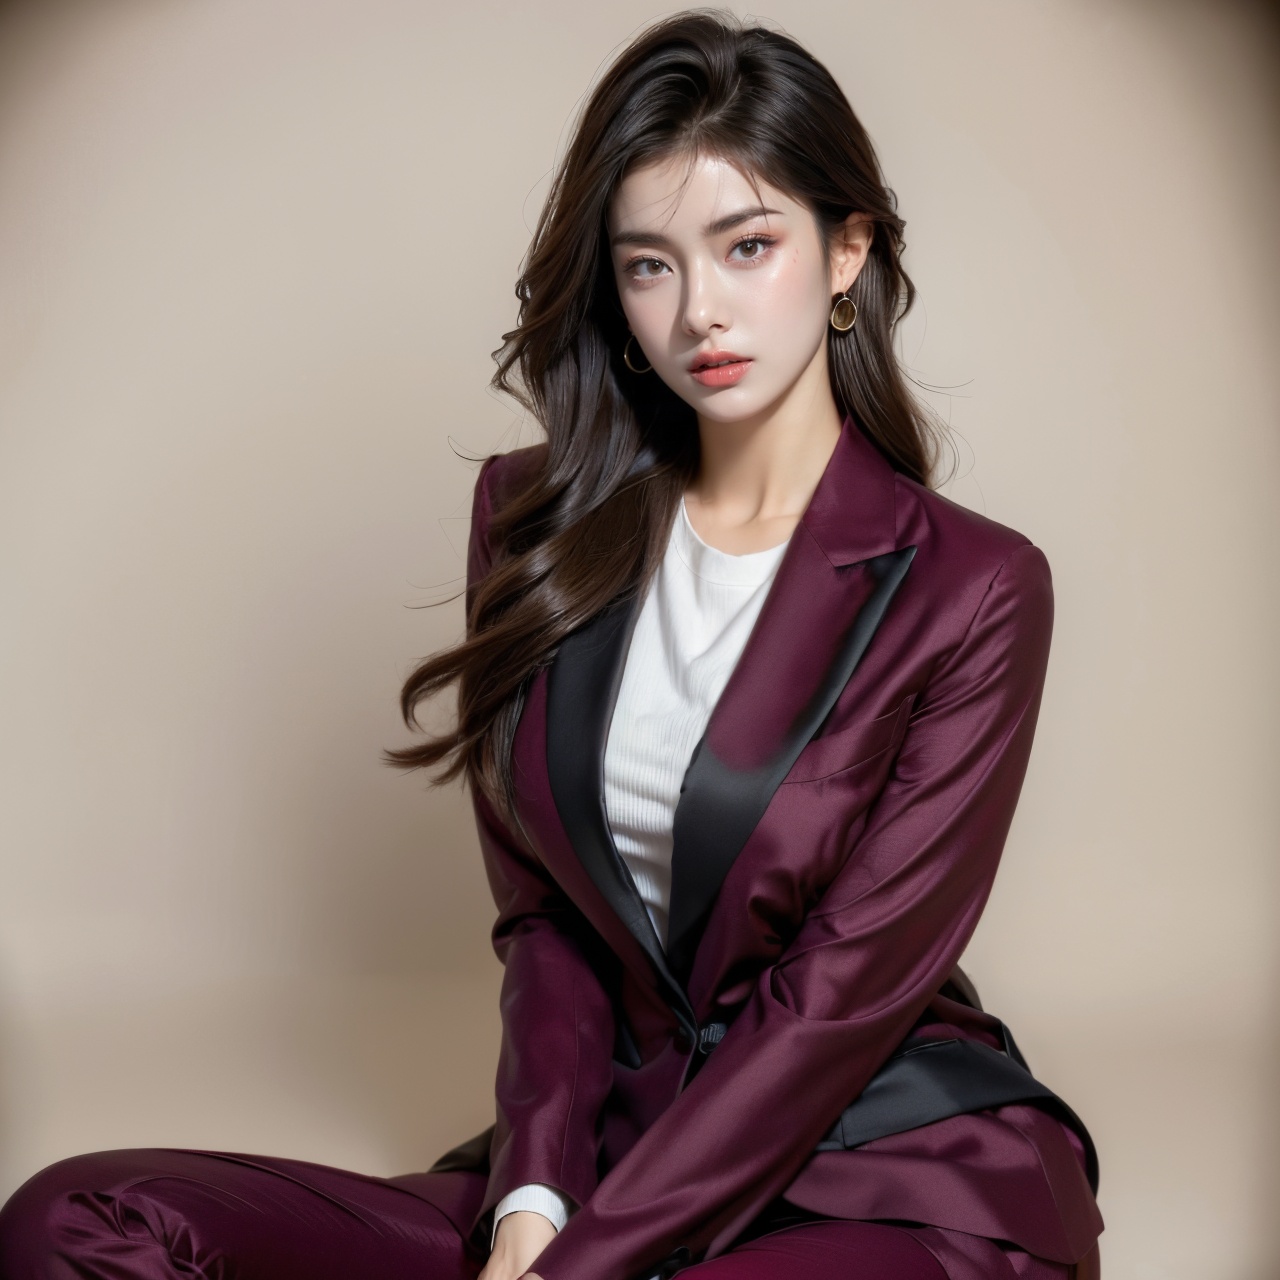  Girl, suit, pretty face, (photo reality: 1.3) , Edge lighting, (high detail skin: 1.2) , 8K Ultra HD, high quality, high resolution, best ratio four fingers and one thumb, (photo reality: 1.3) , wear a red suit jacket, white shirt inside, large breasts, solid color background, solid red background, high-grade feeling, texture pull full, 1 girl